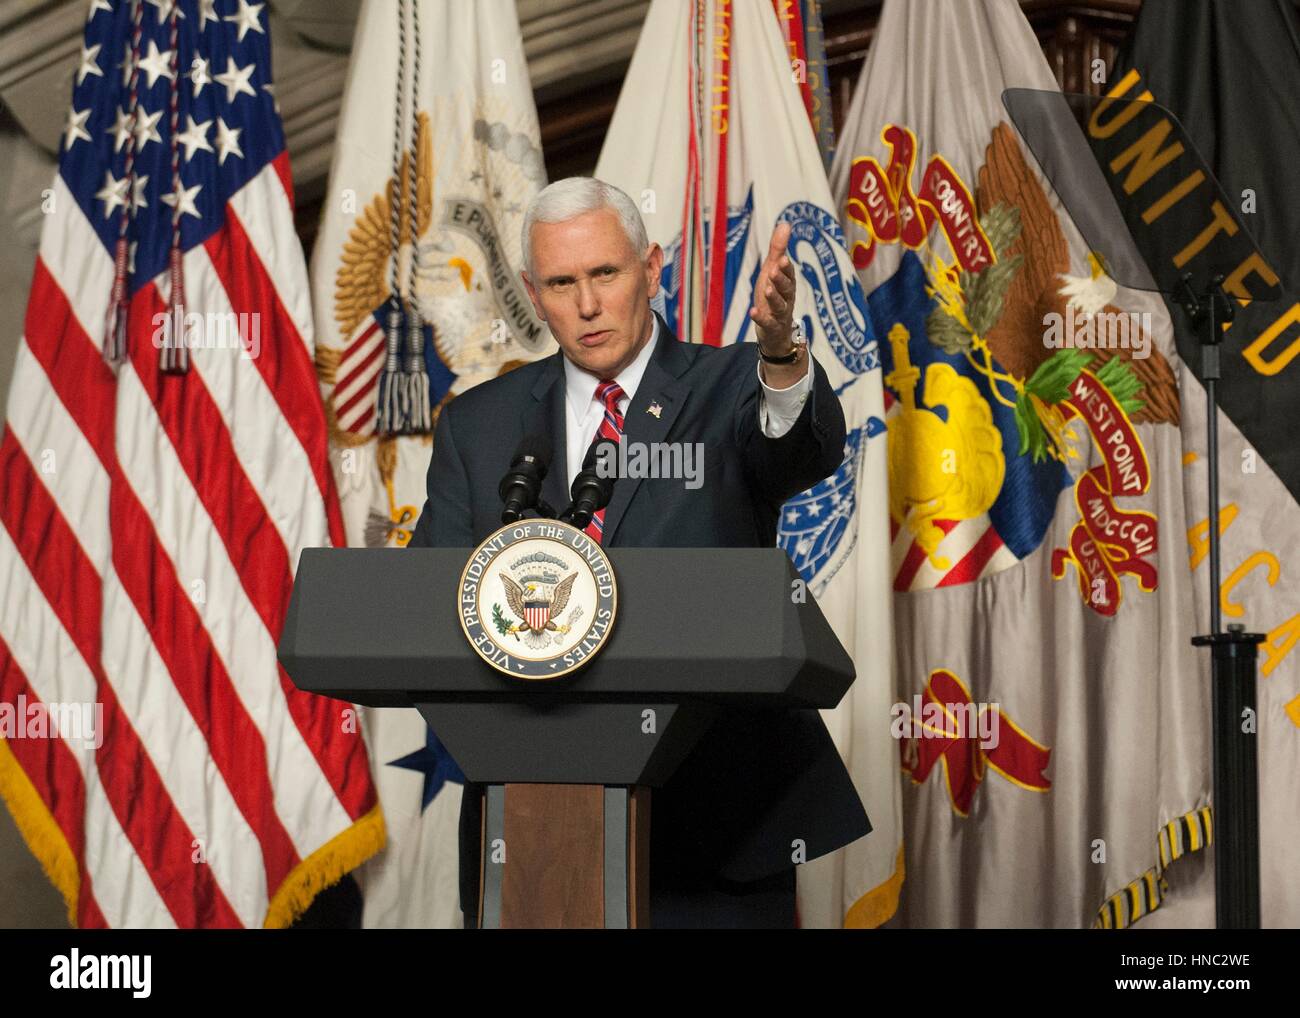 U.S. Vice President Mike Pence addresses the Corps of Cadets during the Flipper Dinner at the U.S. Military Academy February 9, 2017 in West Point, New York.  The annual dinner is held to commemorate the life of Henry O. Flipper, the first African-American graduate of West Point. Stock Photo